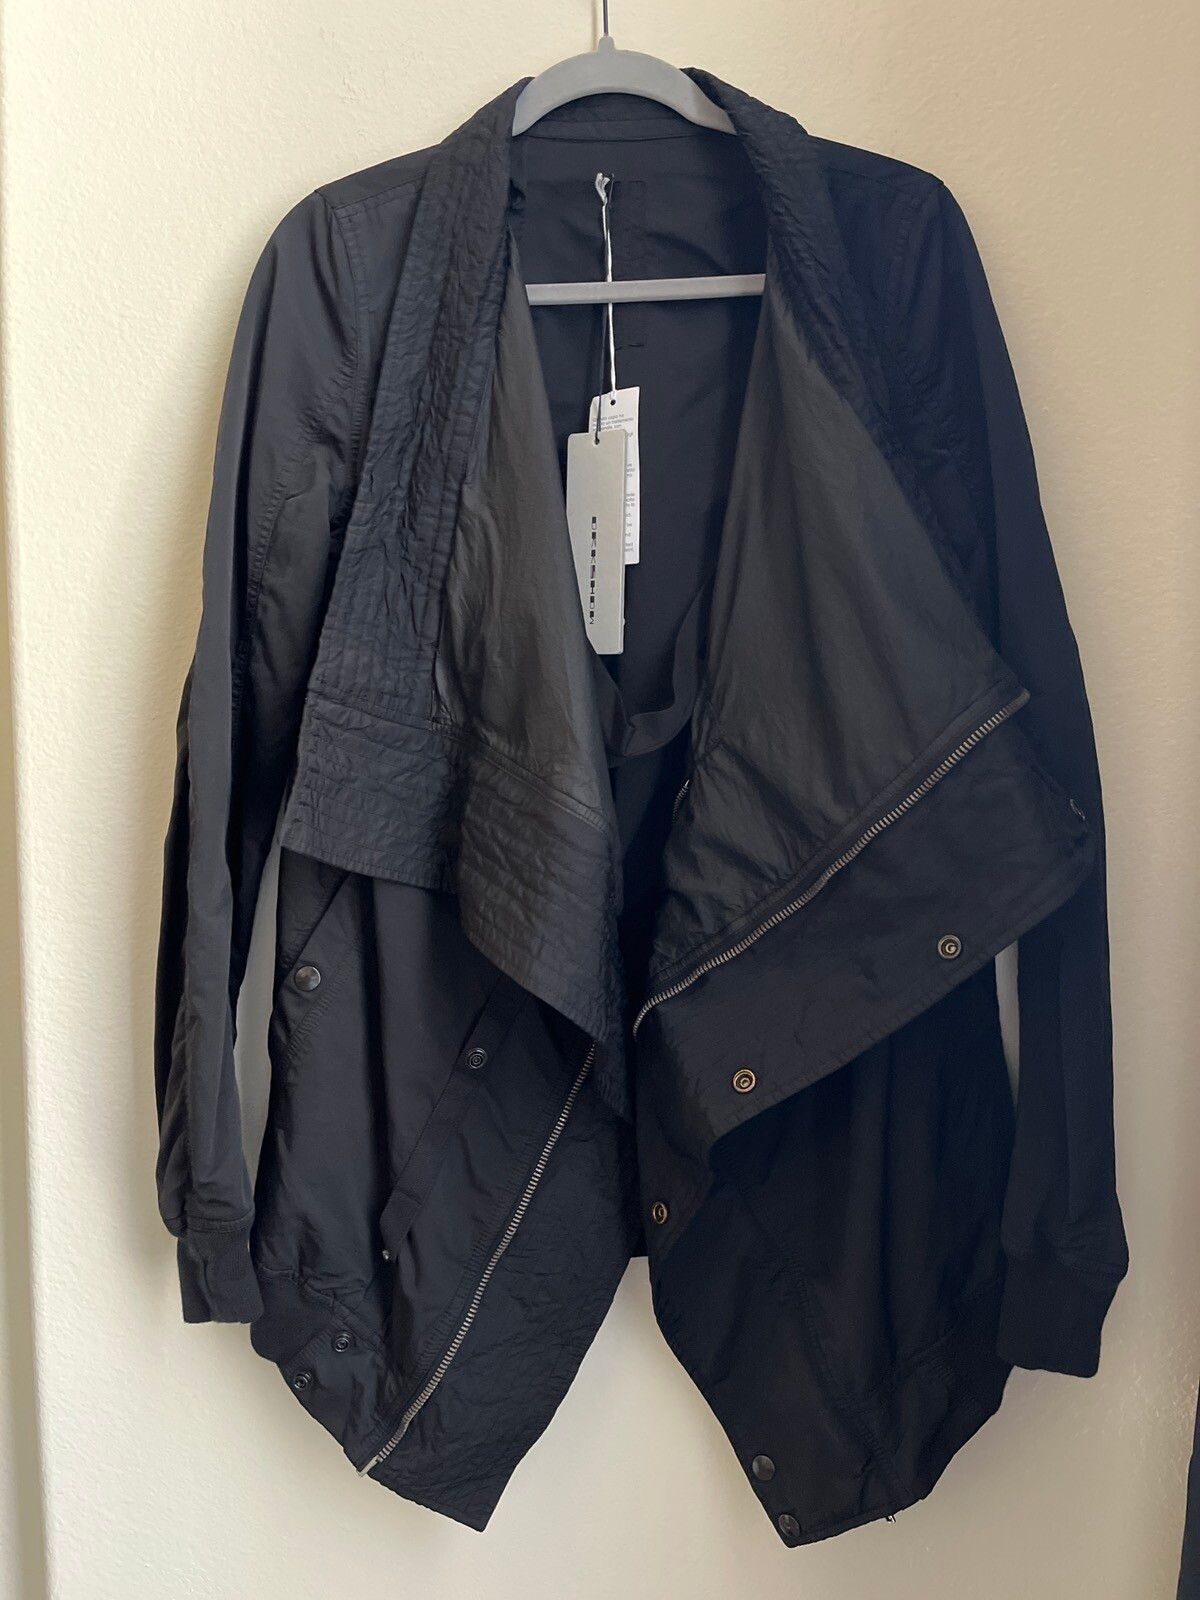 Rick Owens Exploder parka jacket with body strap | Grailed